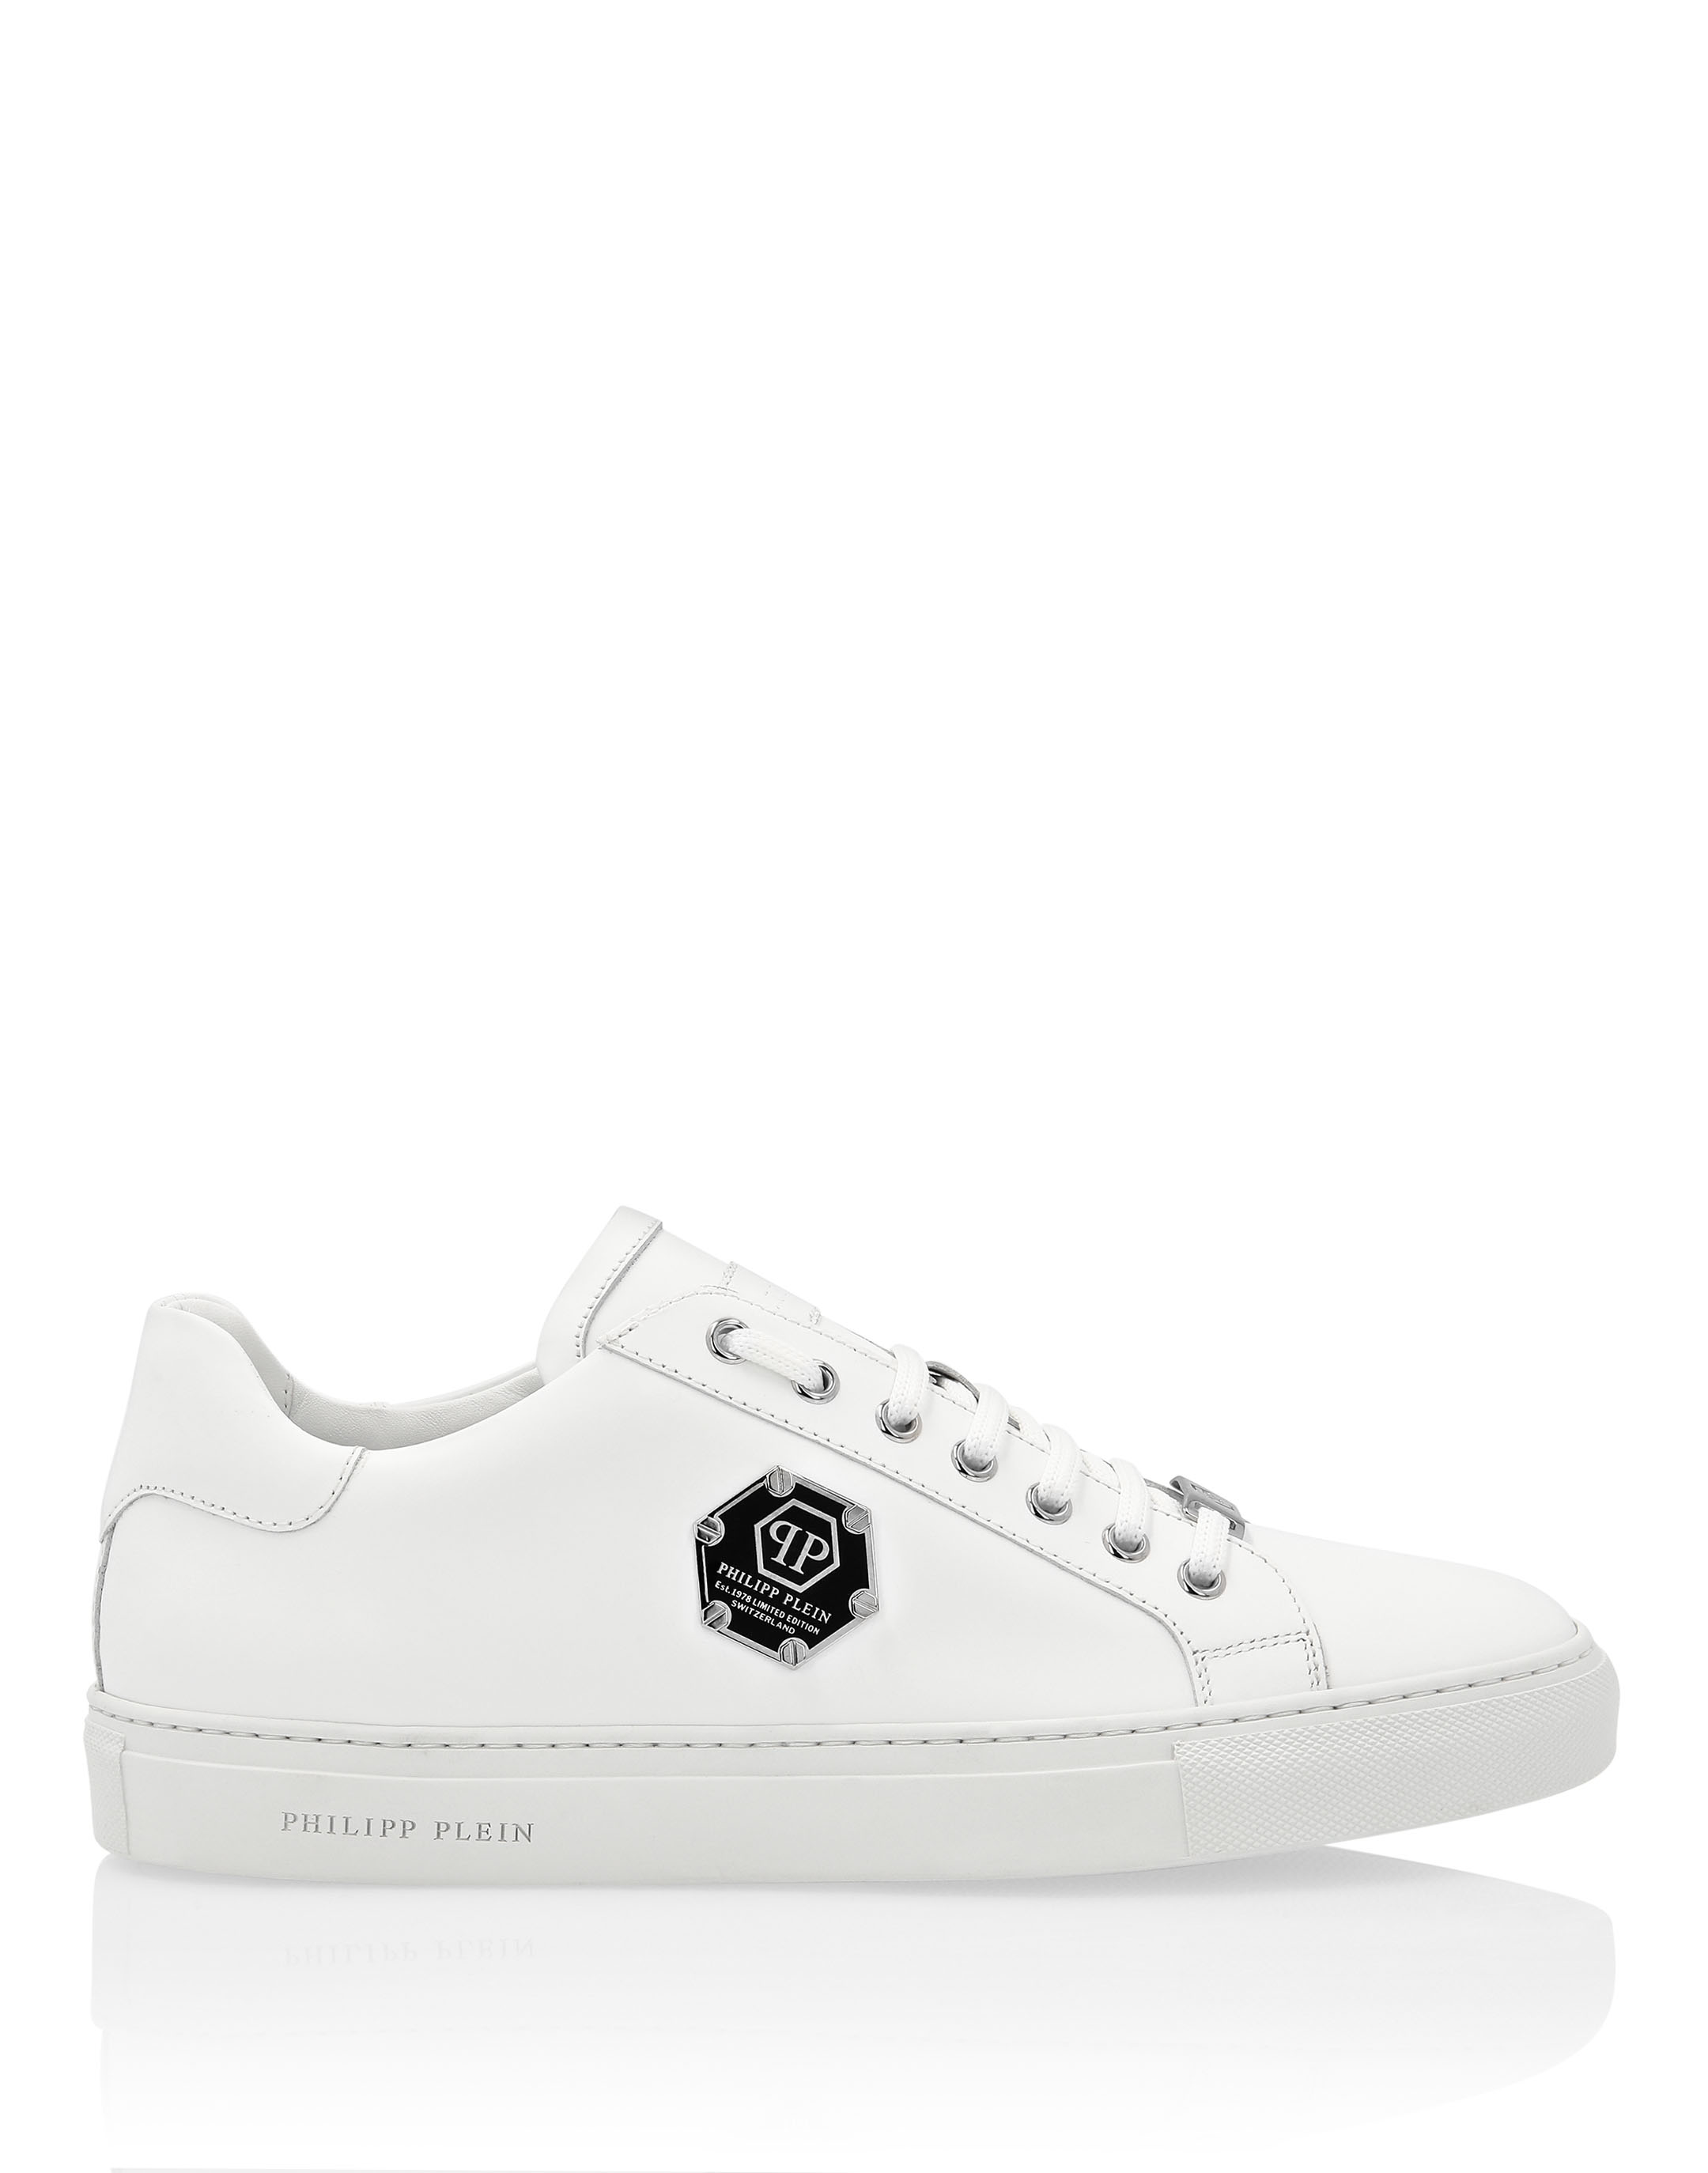 philipp plein shoes limited edition